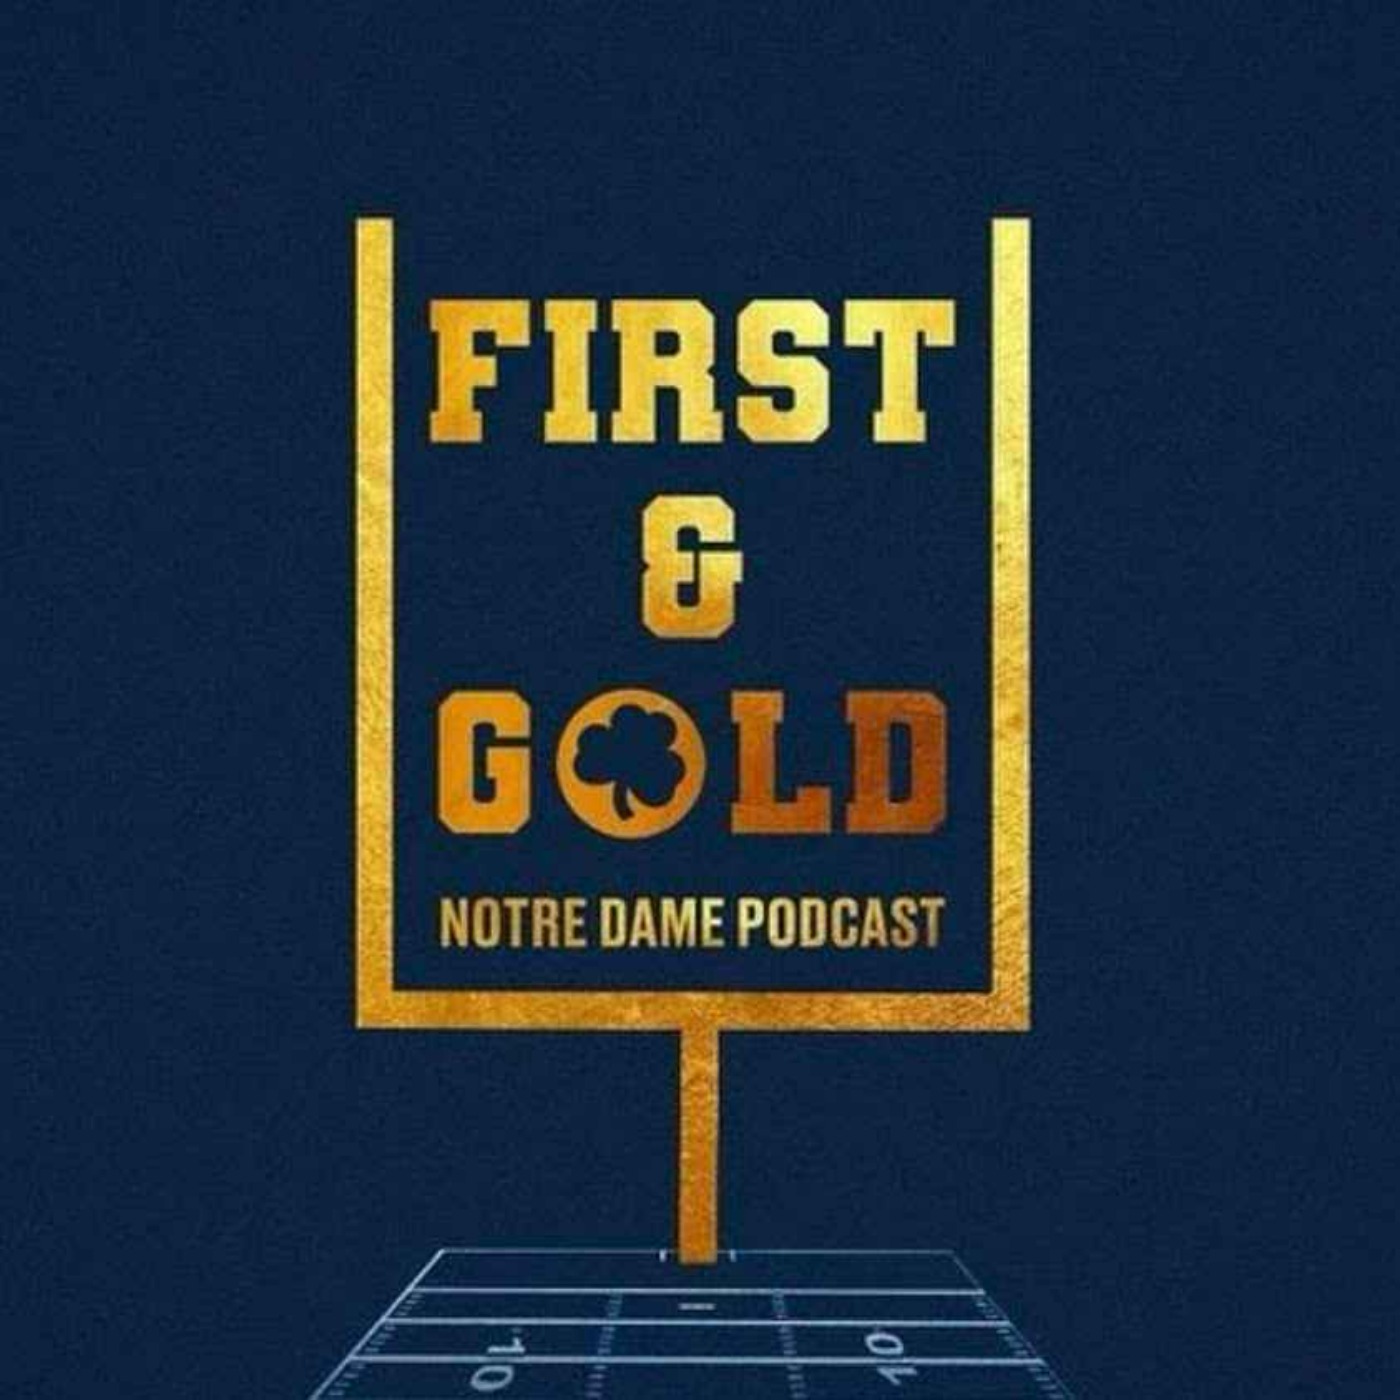 First and Gold: Notre Dame Podcast